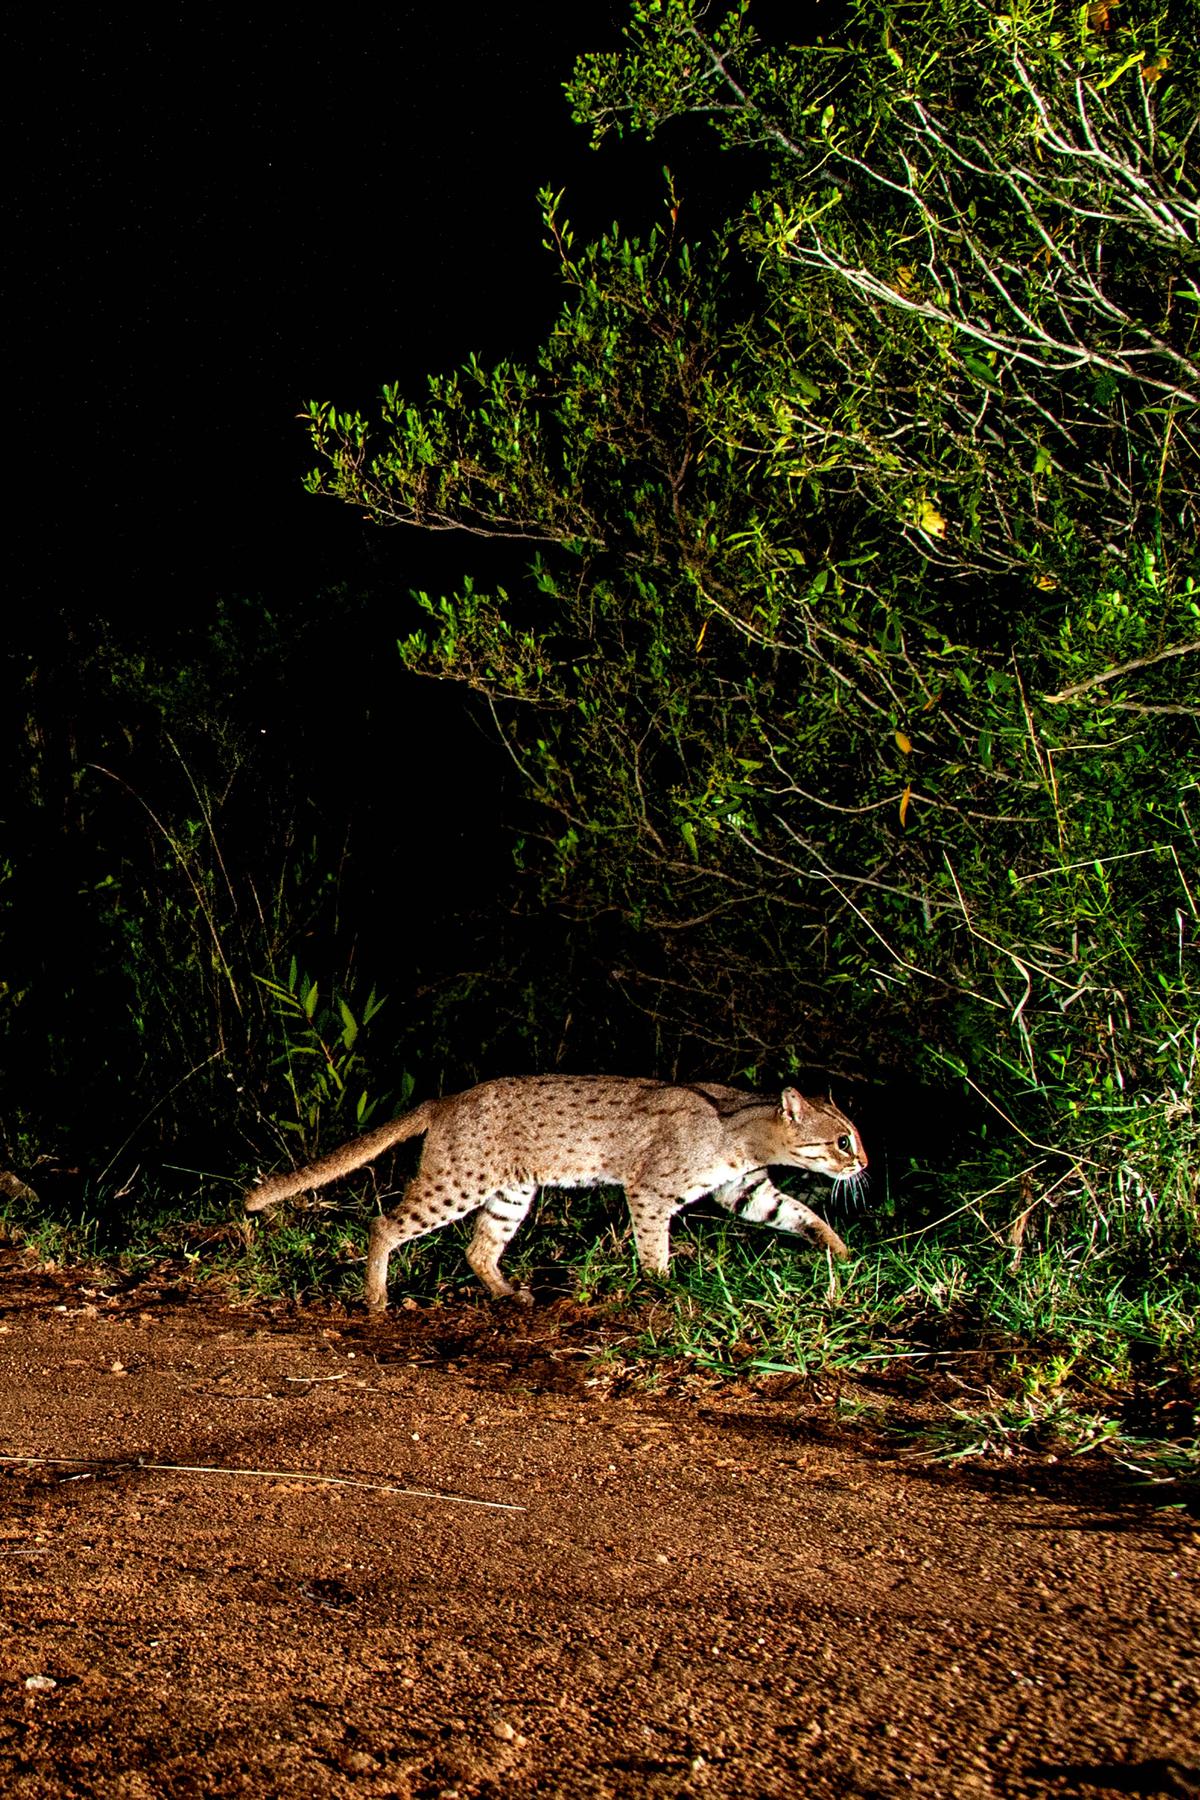 A rare and elusive rusty-spotted cat captured on camera. (Courtesy of Caters News)